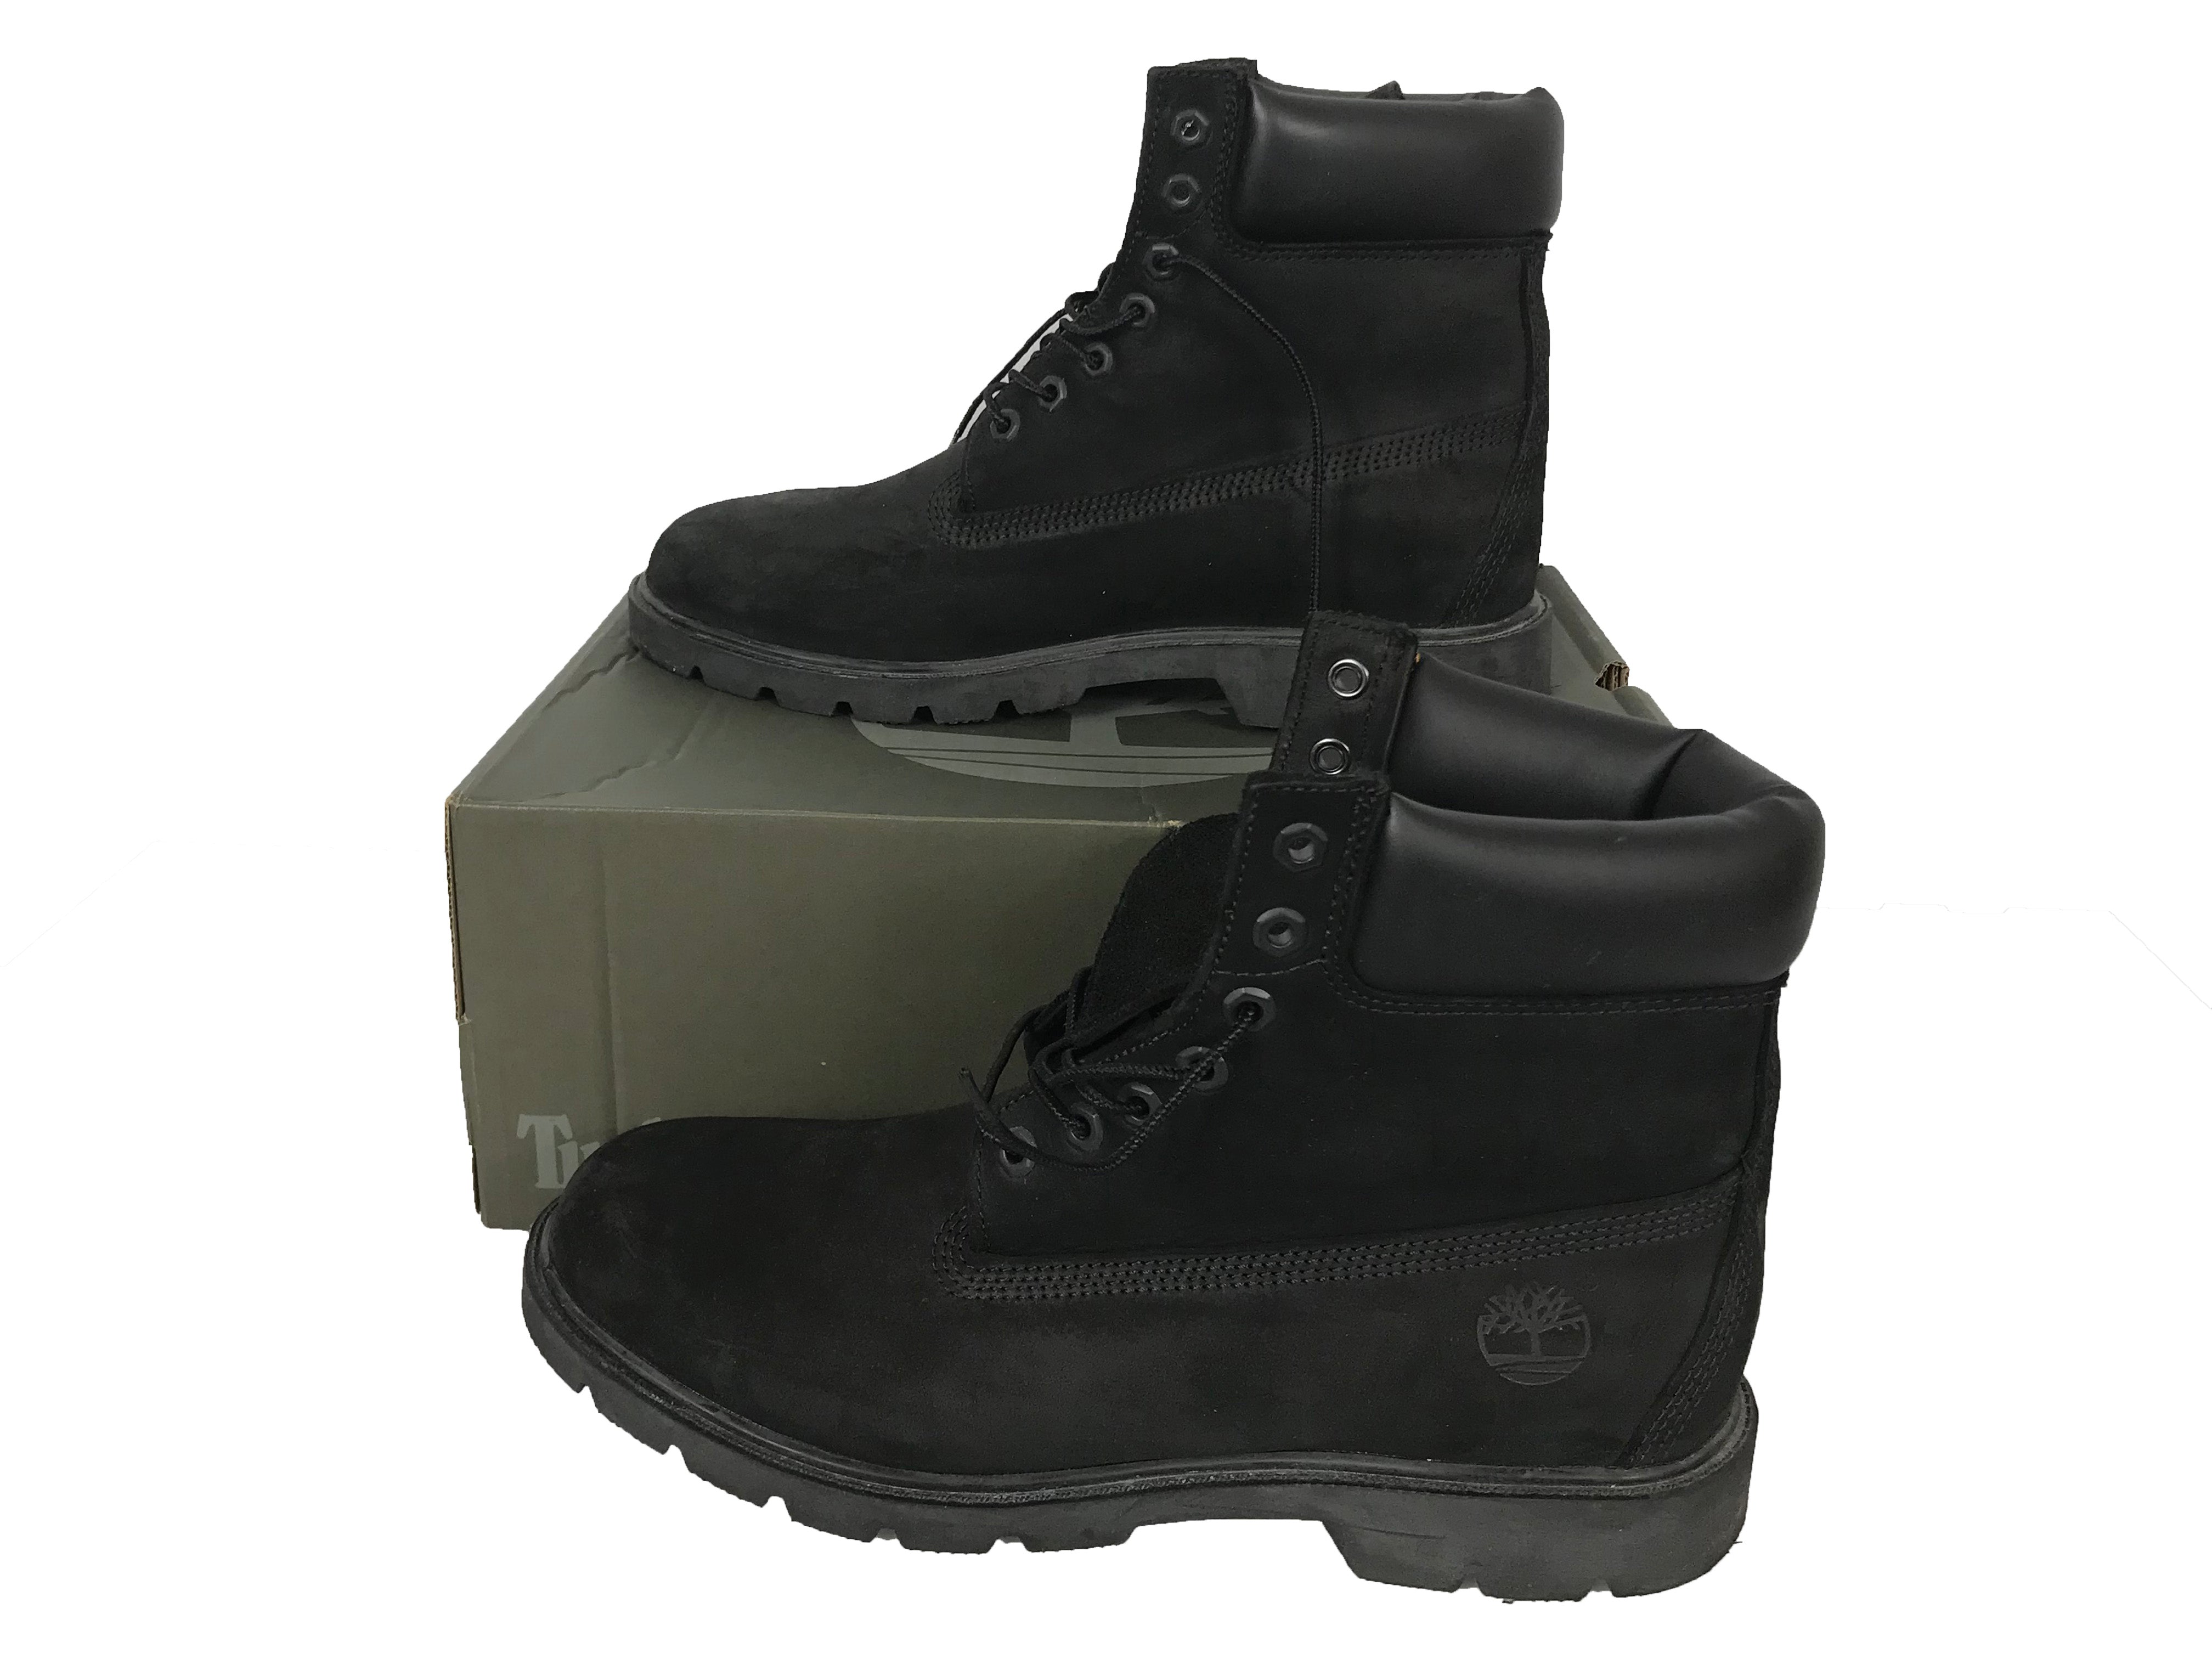 Black Suede Timberland Boots Men's Size 10.5